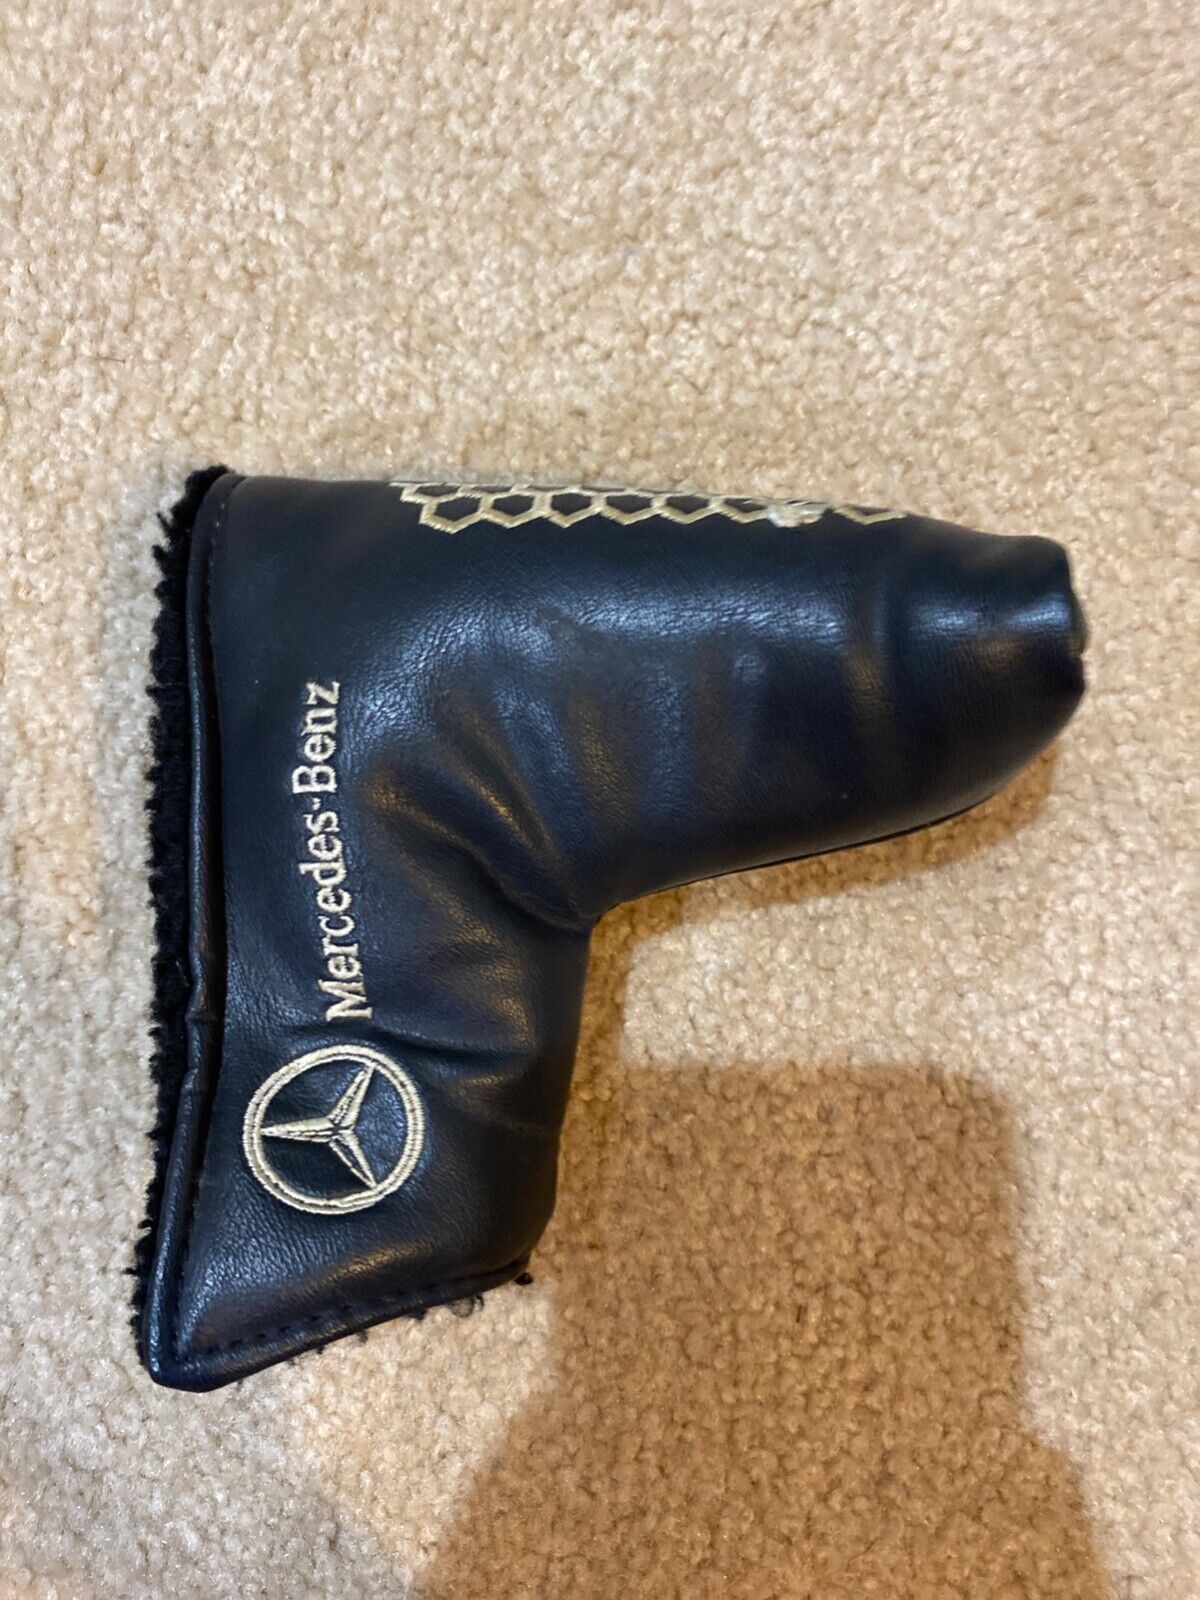 Mercedes Benz bettinard head cover used but in great condition.